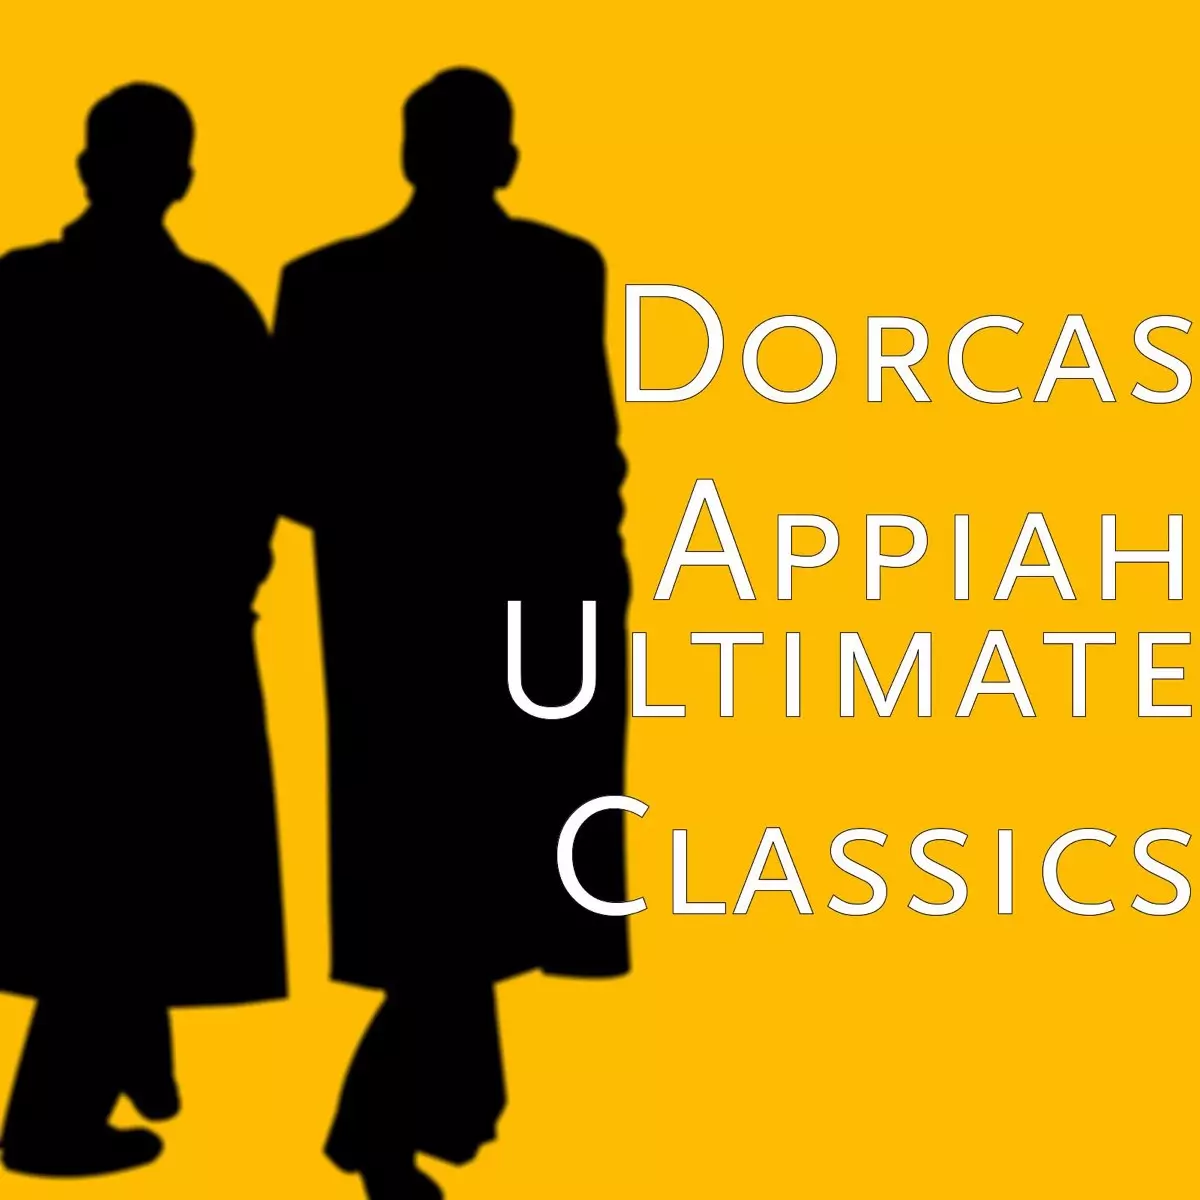 Ultimate Classics by Dorcas Appiah on Apple Music